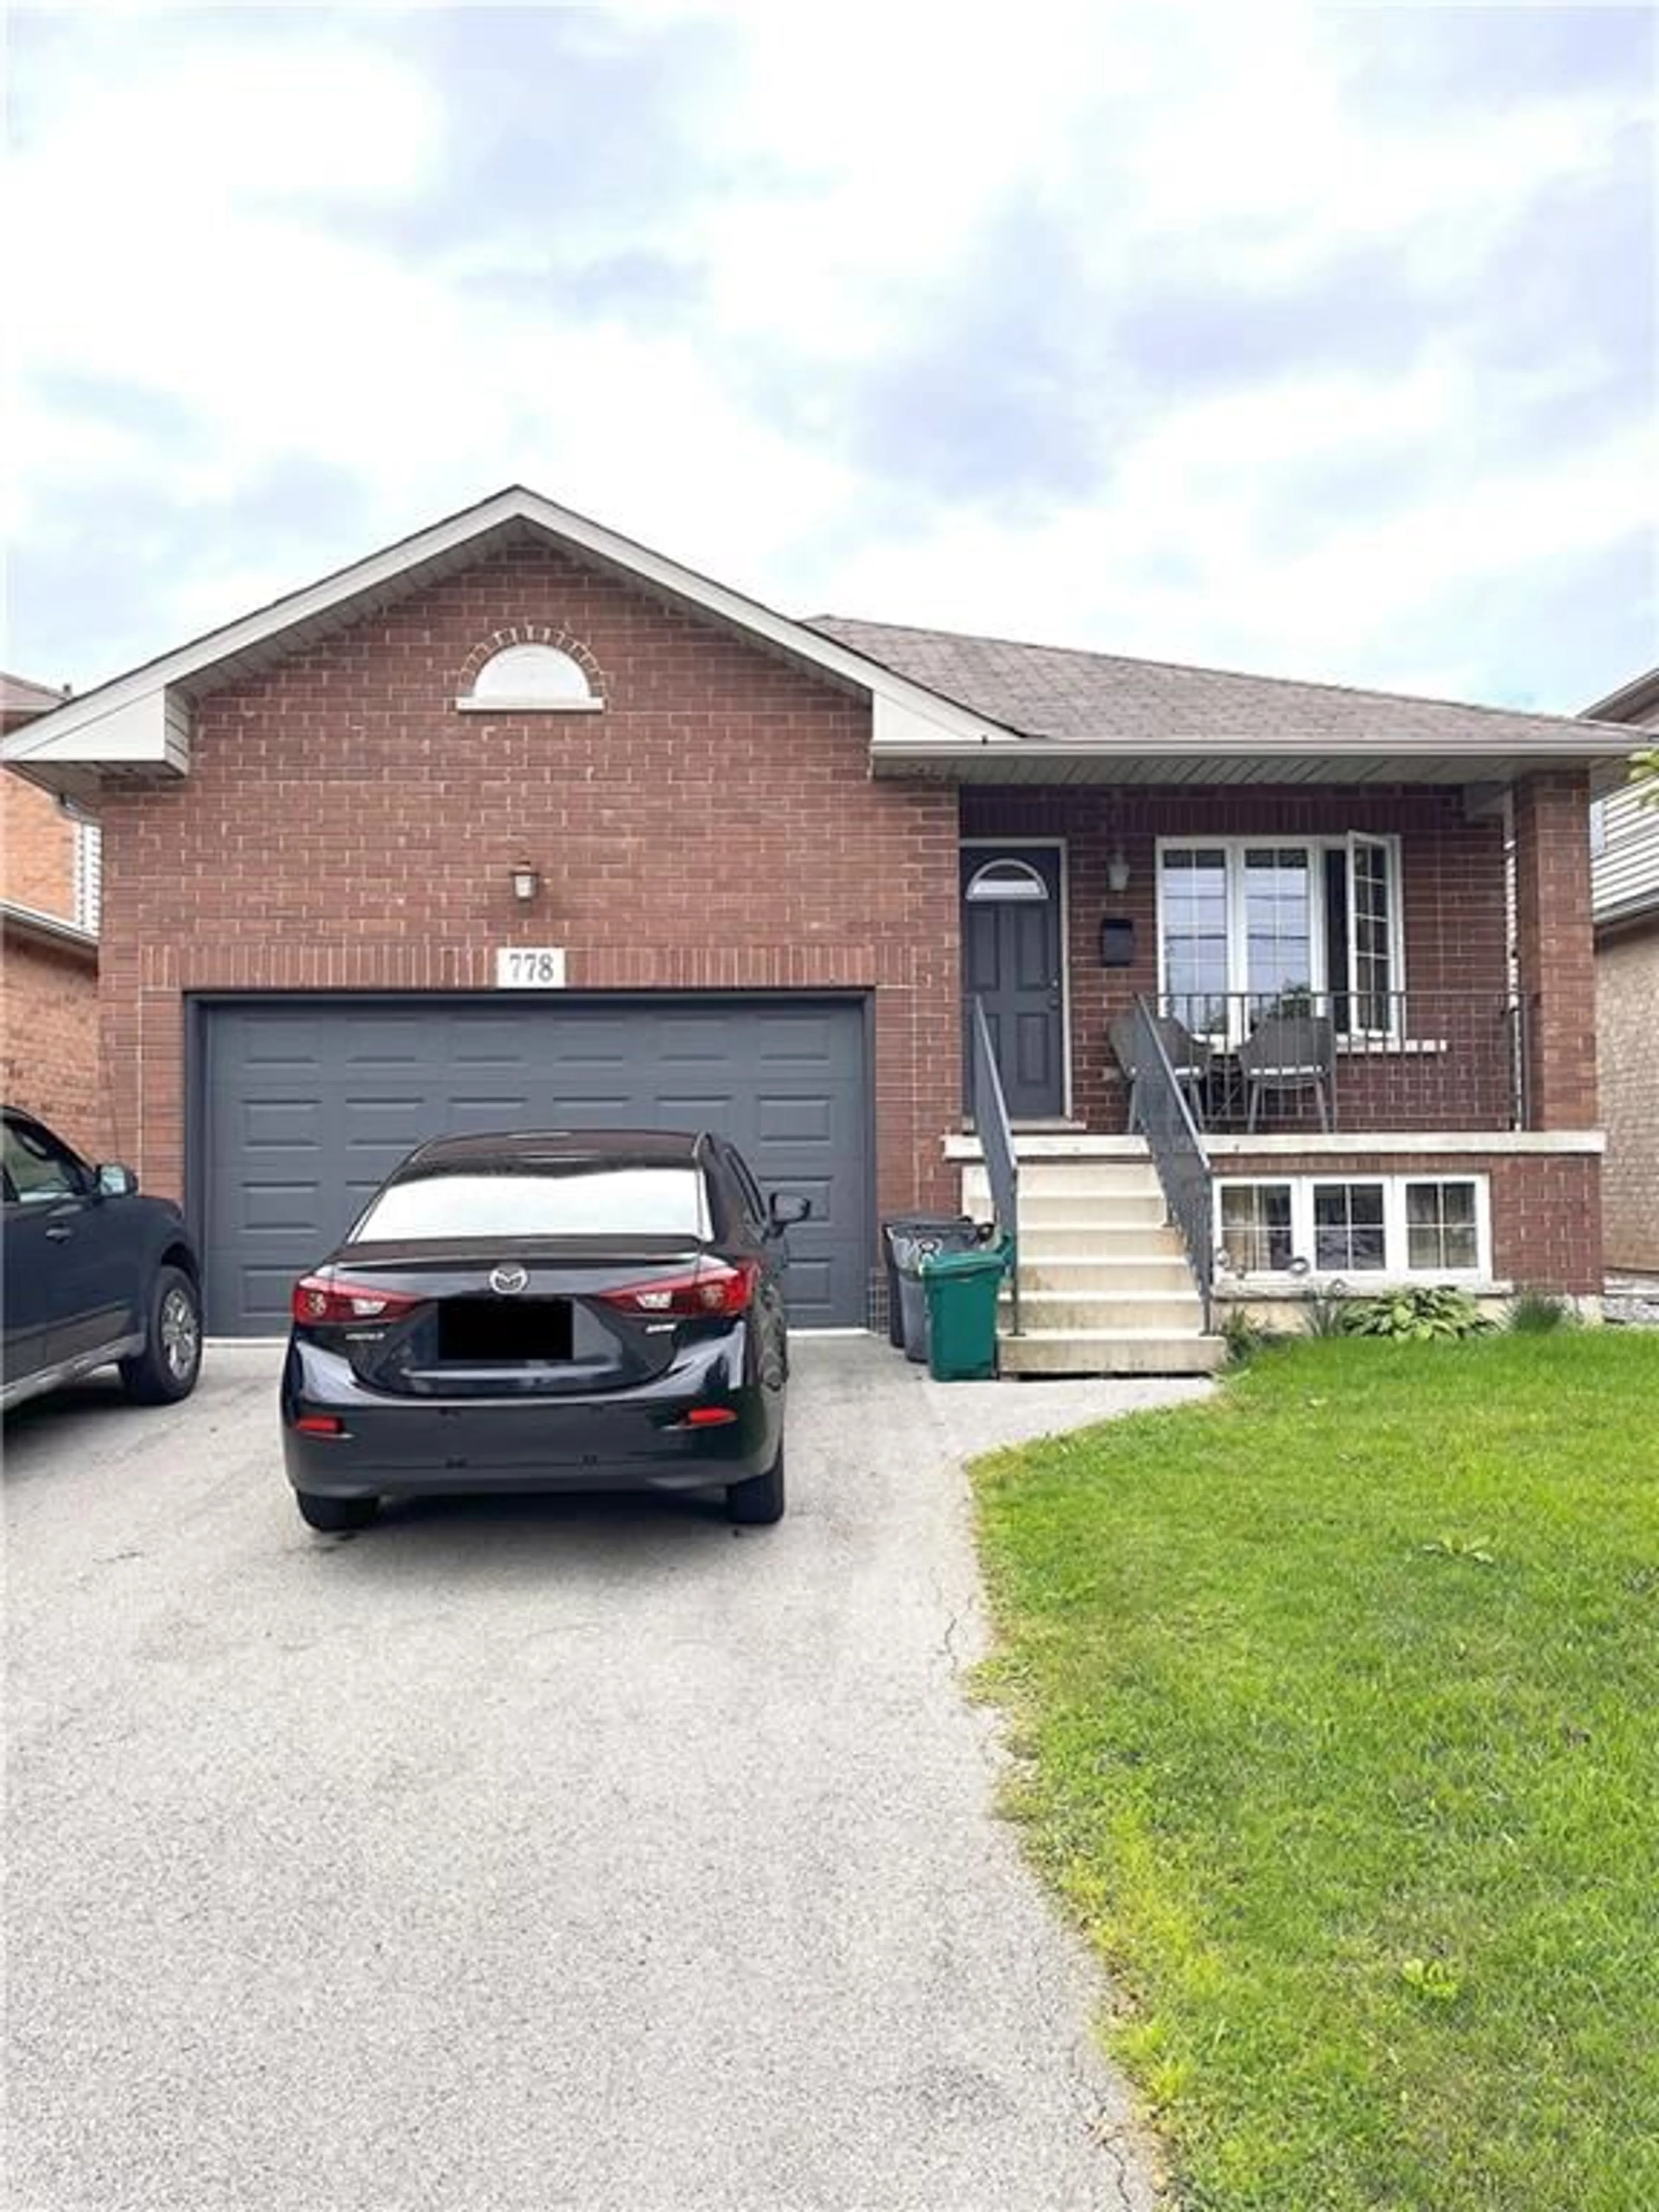 Home with brick exterior material for 778 NINTH Ave, Hamilton Ontario L8T 2A8